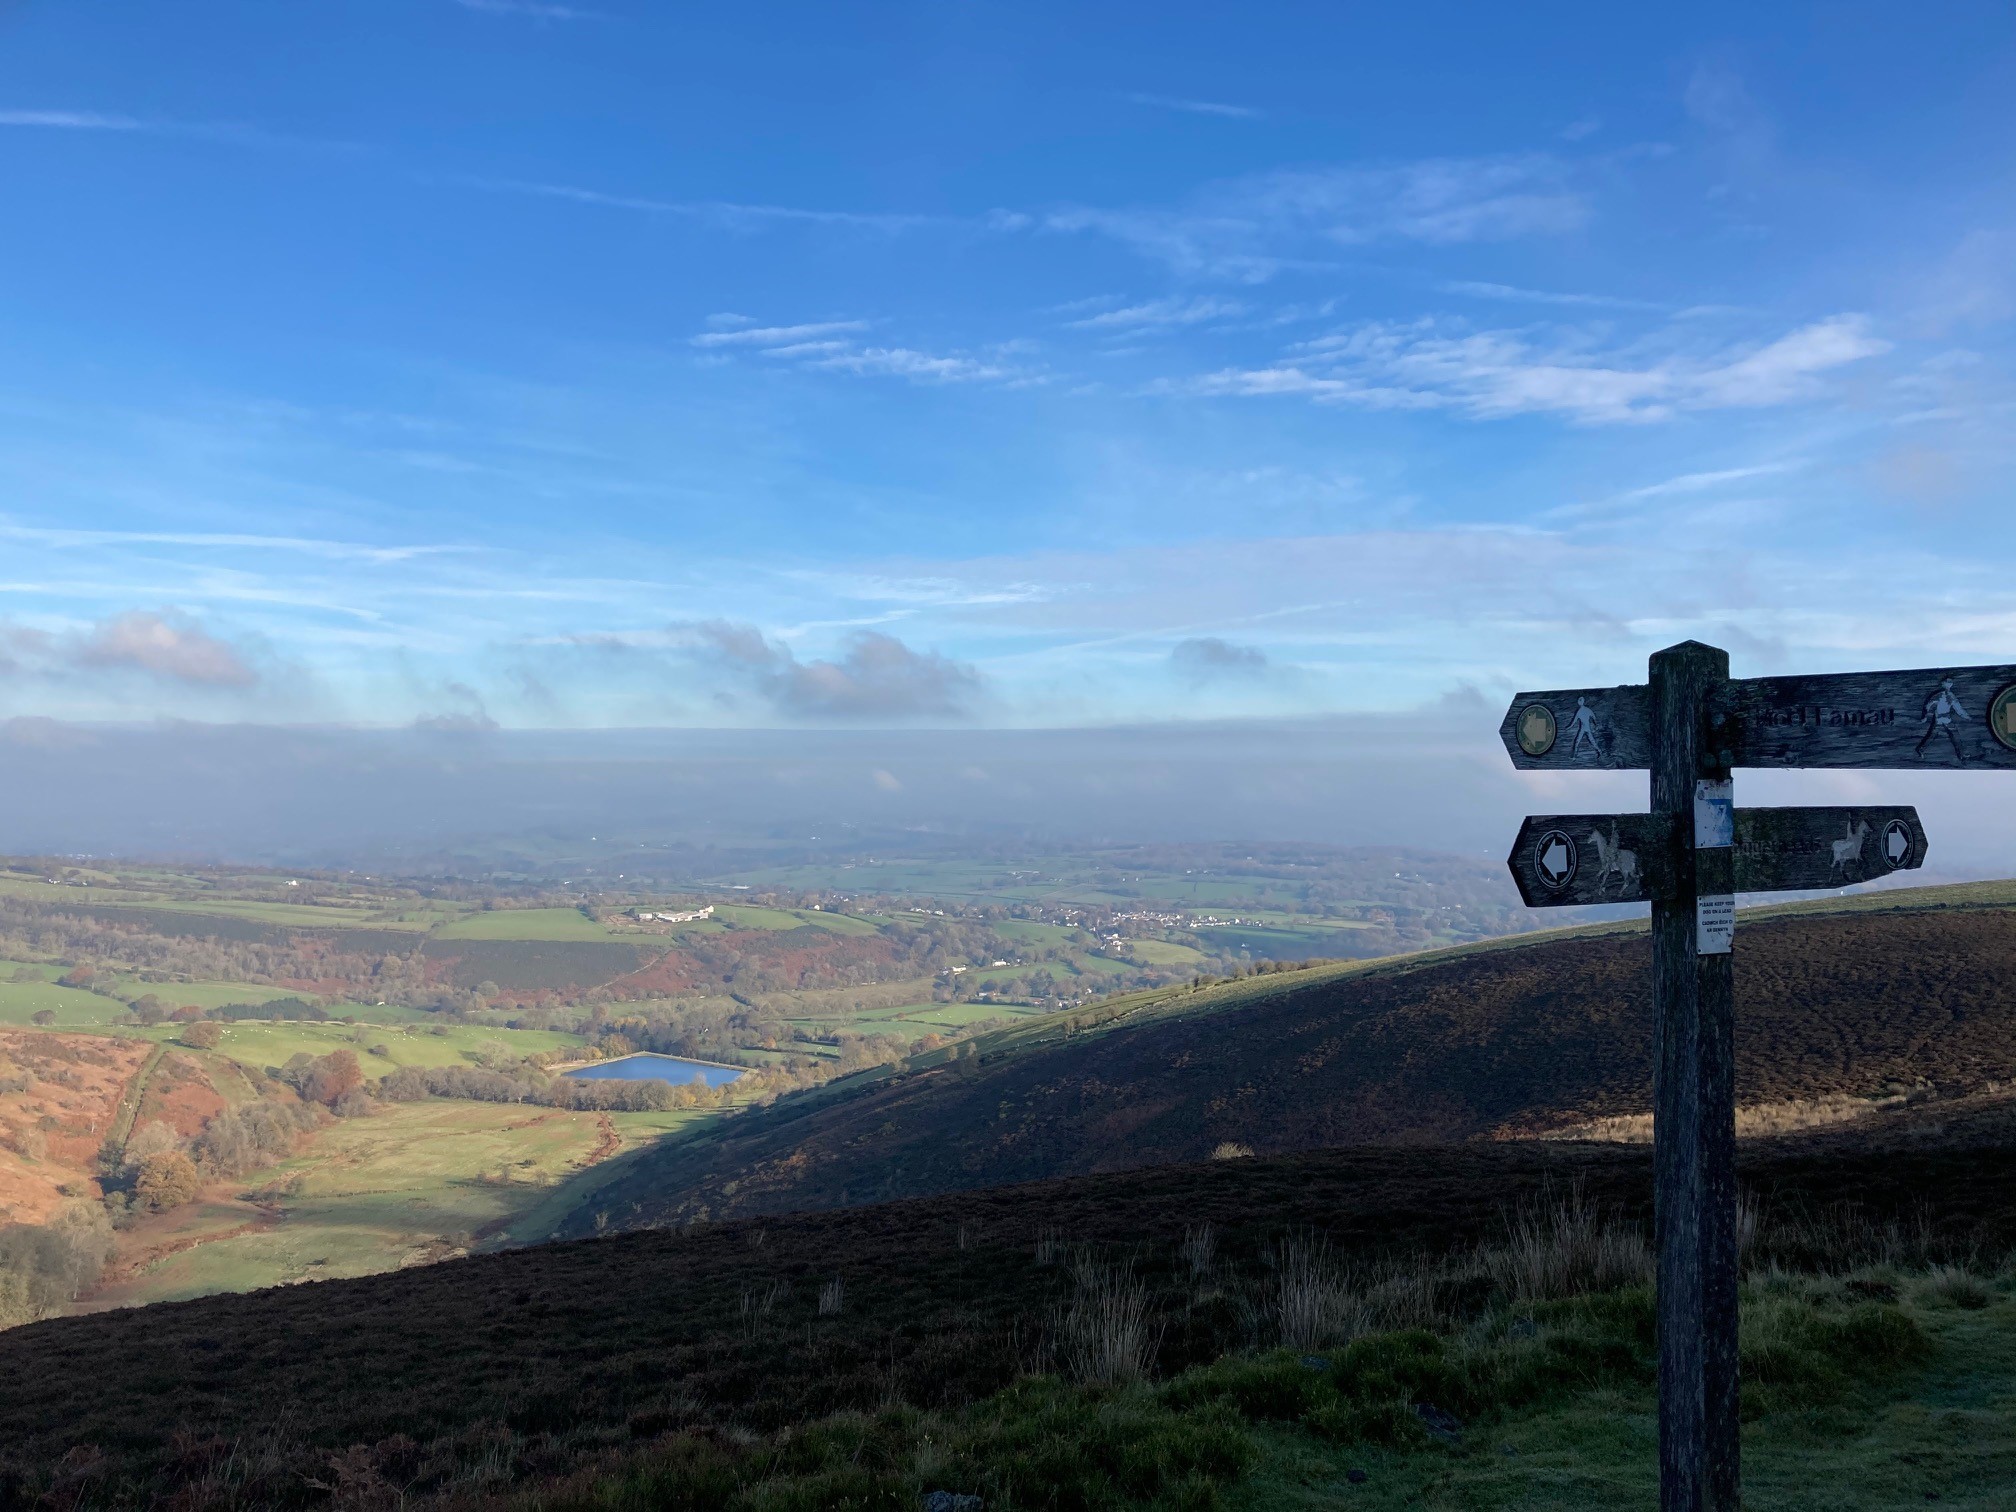 Scene from the Cilcain - Moel Famau walk. Photo courtesy of Flintshire County Council